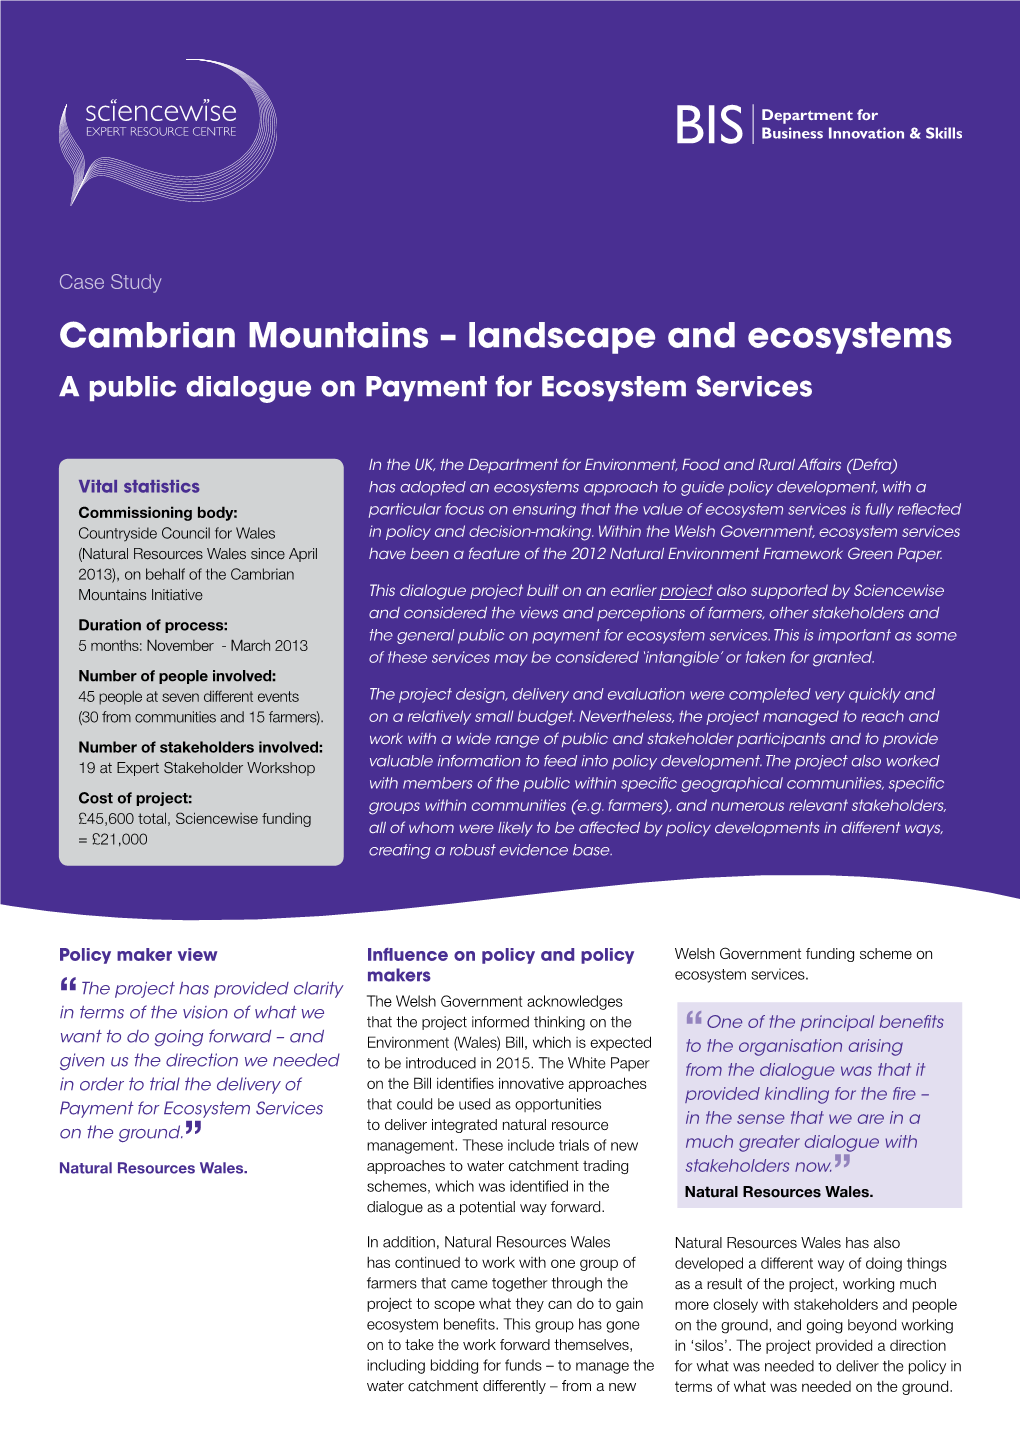 Cambrian Mountains – Landscape and Ecosystems a Public Dialogue on Payment for Ecosystem Services